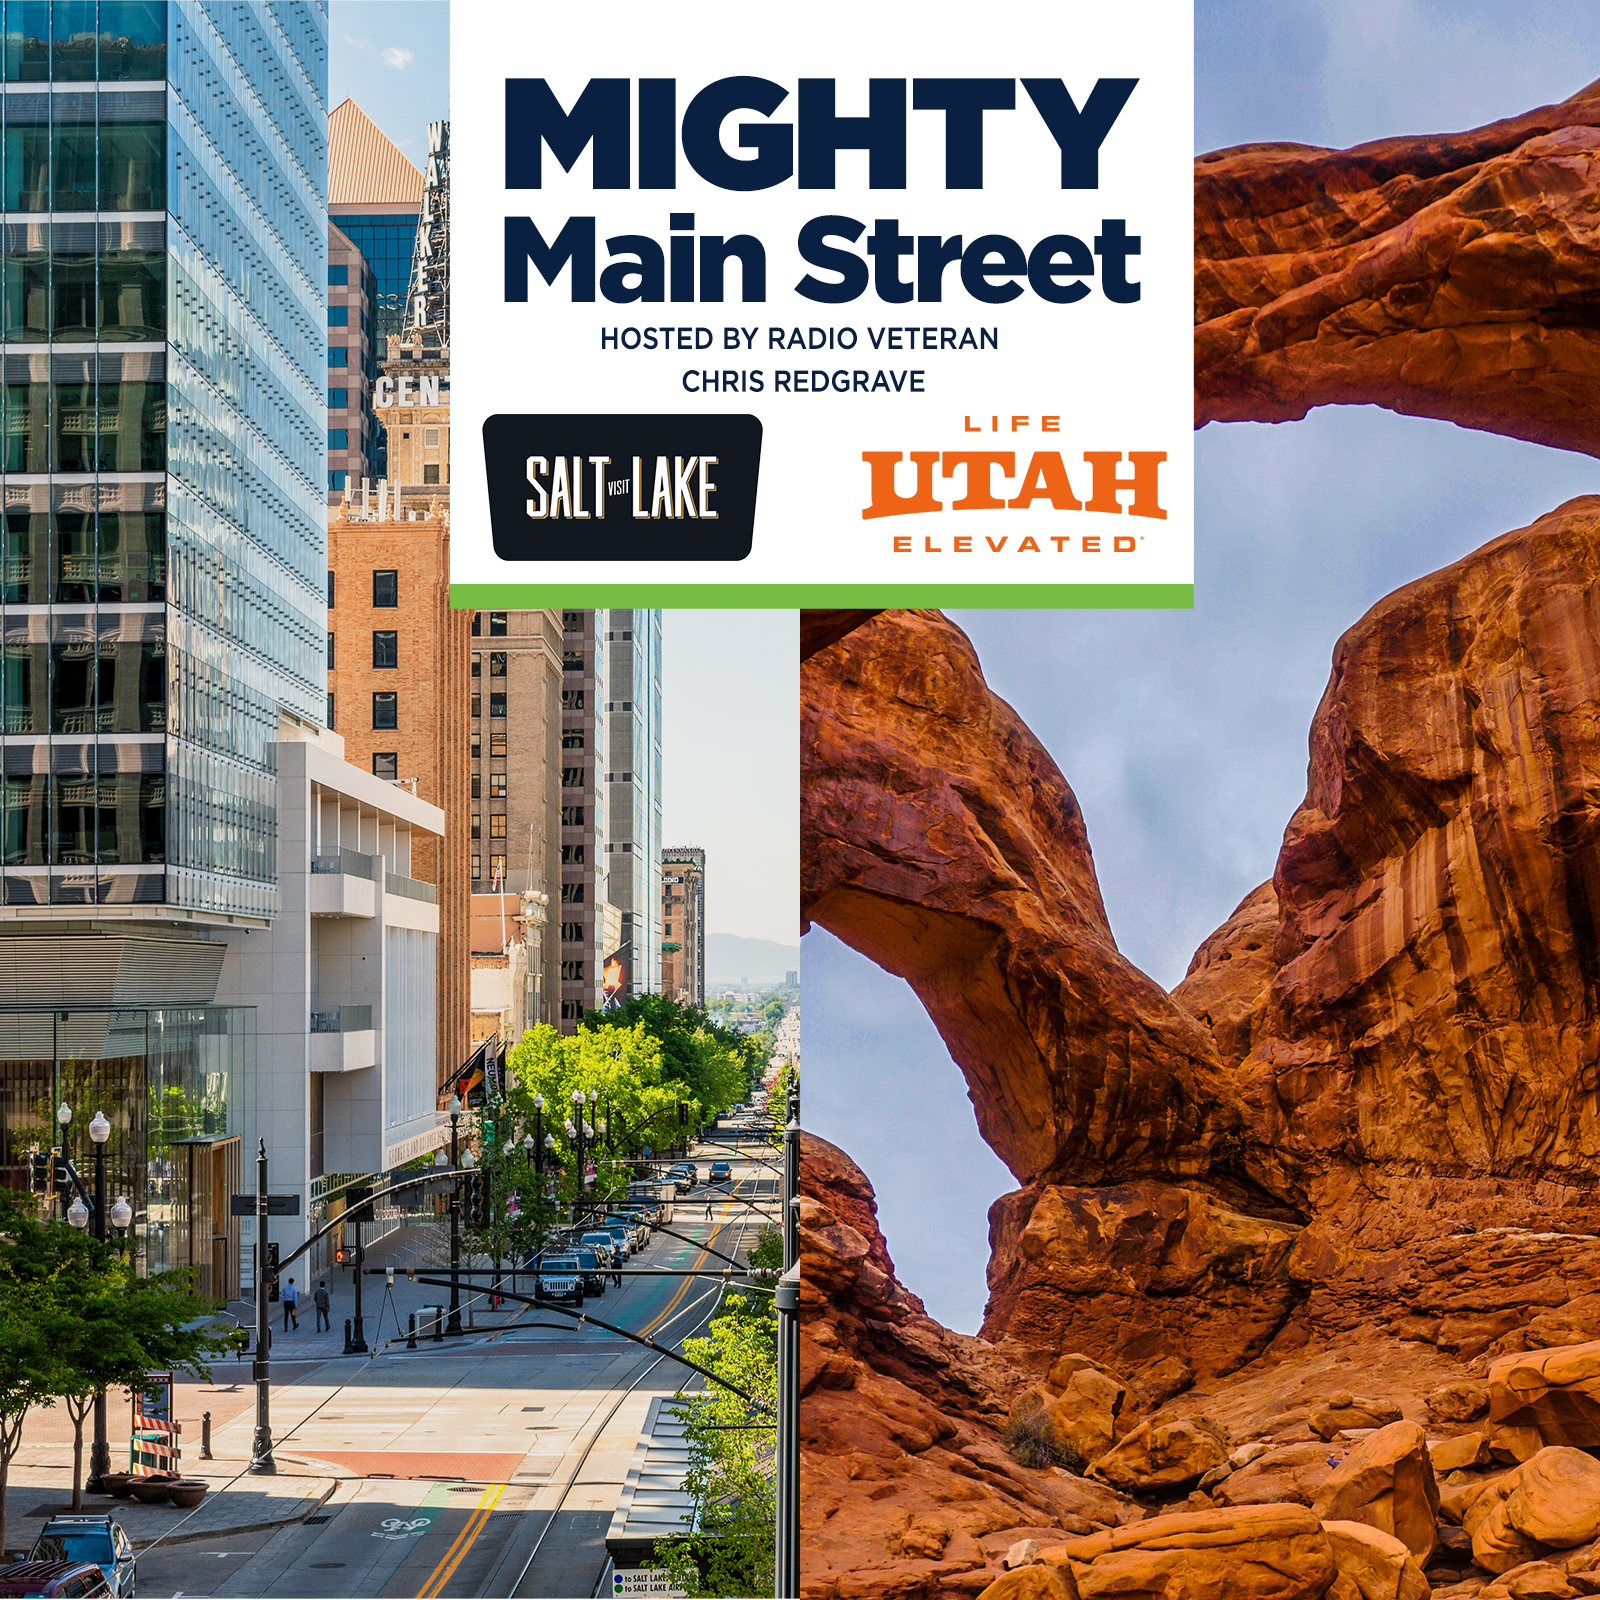 A picture of downtown Salt Lake City and the Moab Arches with a banner advertising a radio special